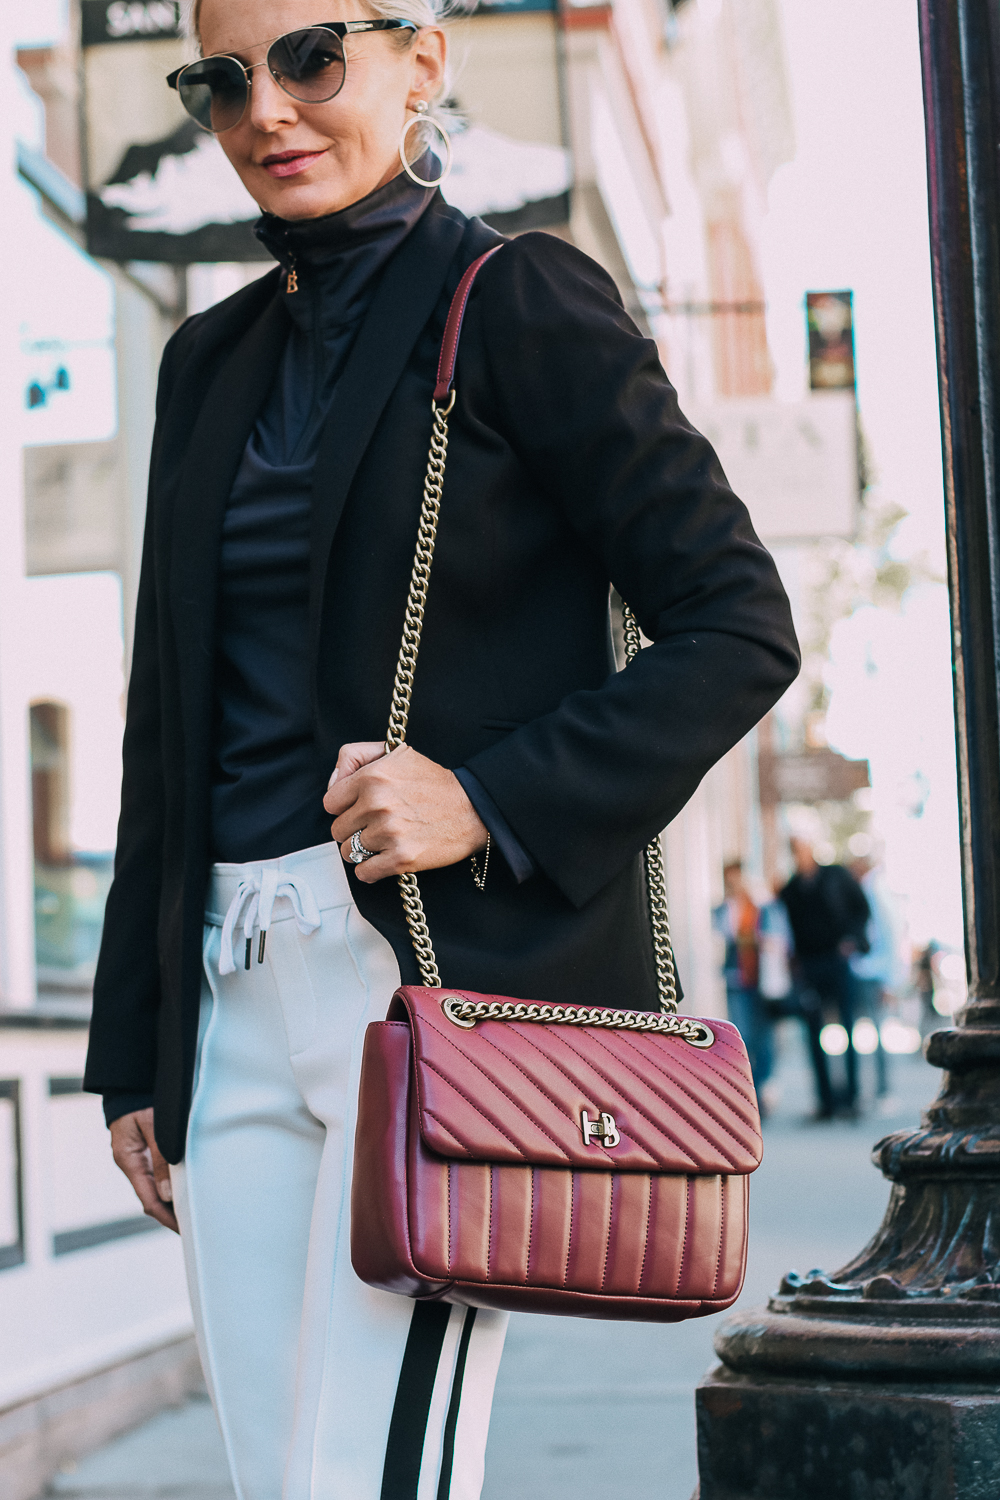 Henri Bendel quilted crossbody bag in burgundy with gold chain link detail paired with Pam & Gela striped pants, Bogner turtleneck and black blazer